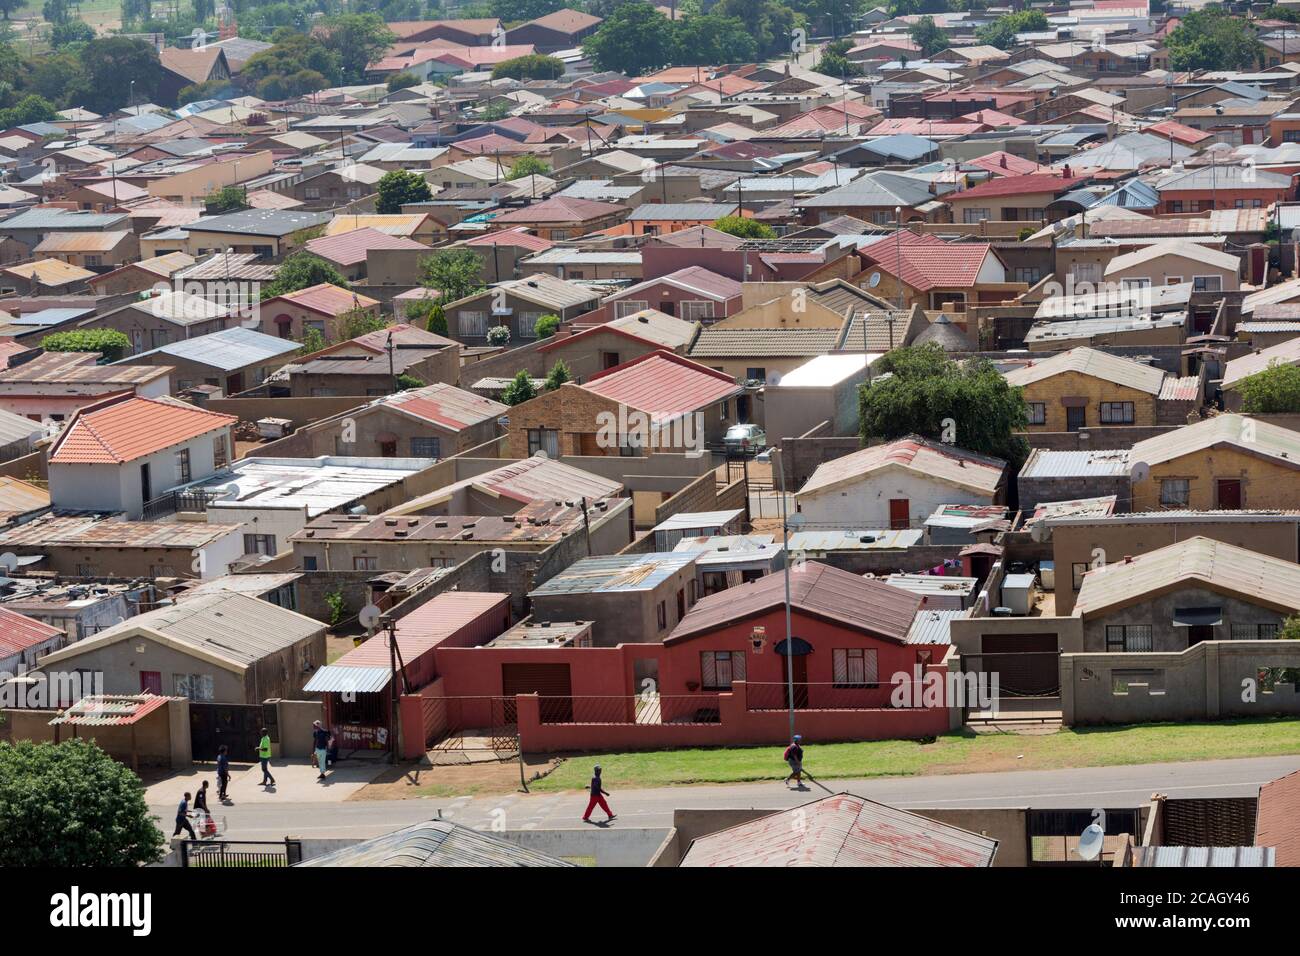 22.10.2018, Johannesburg, Gauteng, South Africa - Overview of houses in the Soweto township. 00U181022D002CAROEX.JPG [MODEL RELEASE: NO, PROPERTY RELE Stock Photo